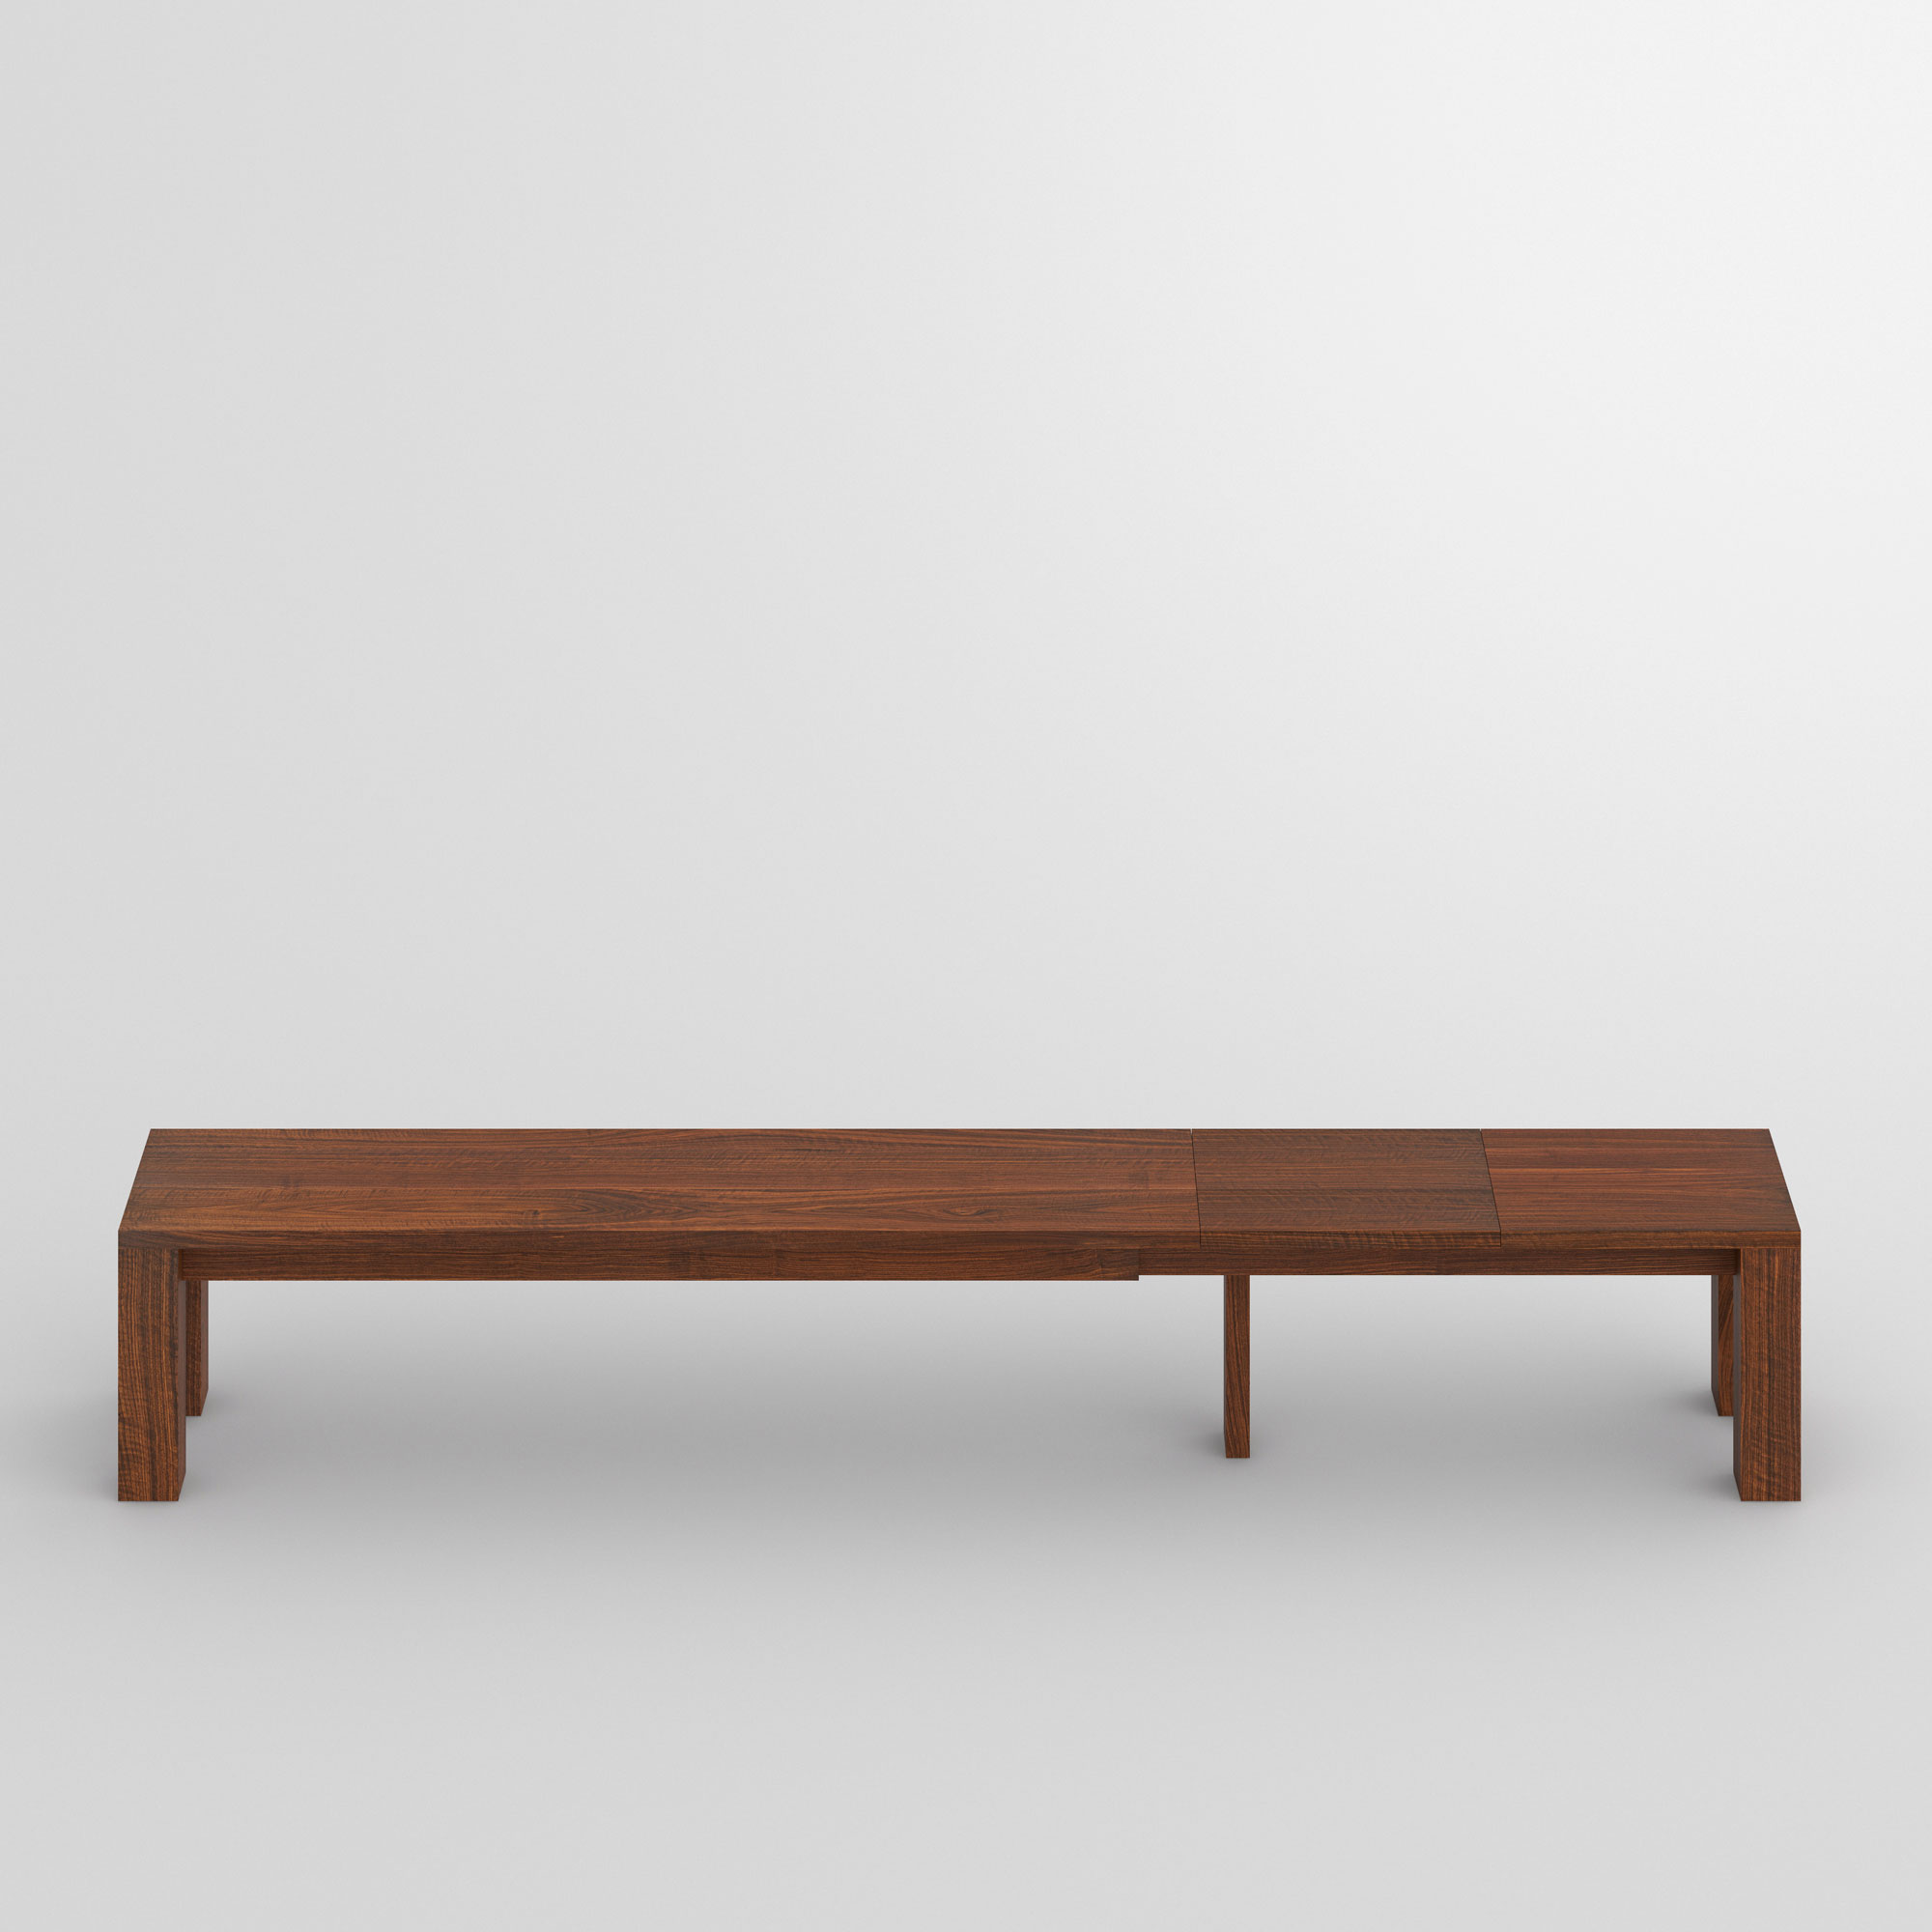 Extendable Bench CUBUS EP 3 cam2 custom made in solid wood by vitamin design